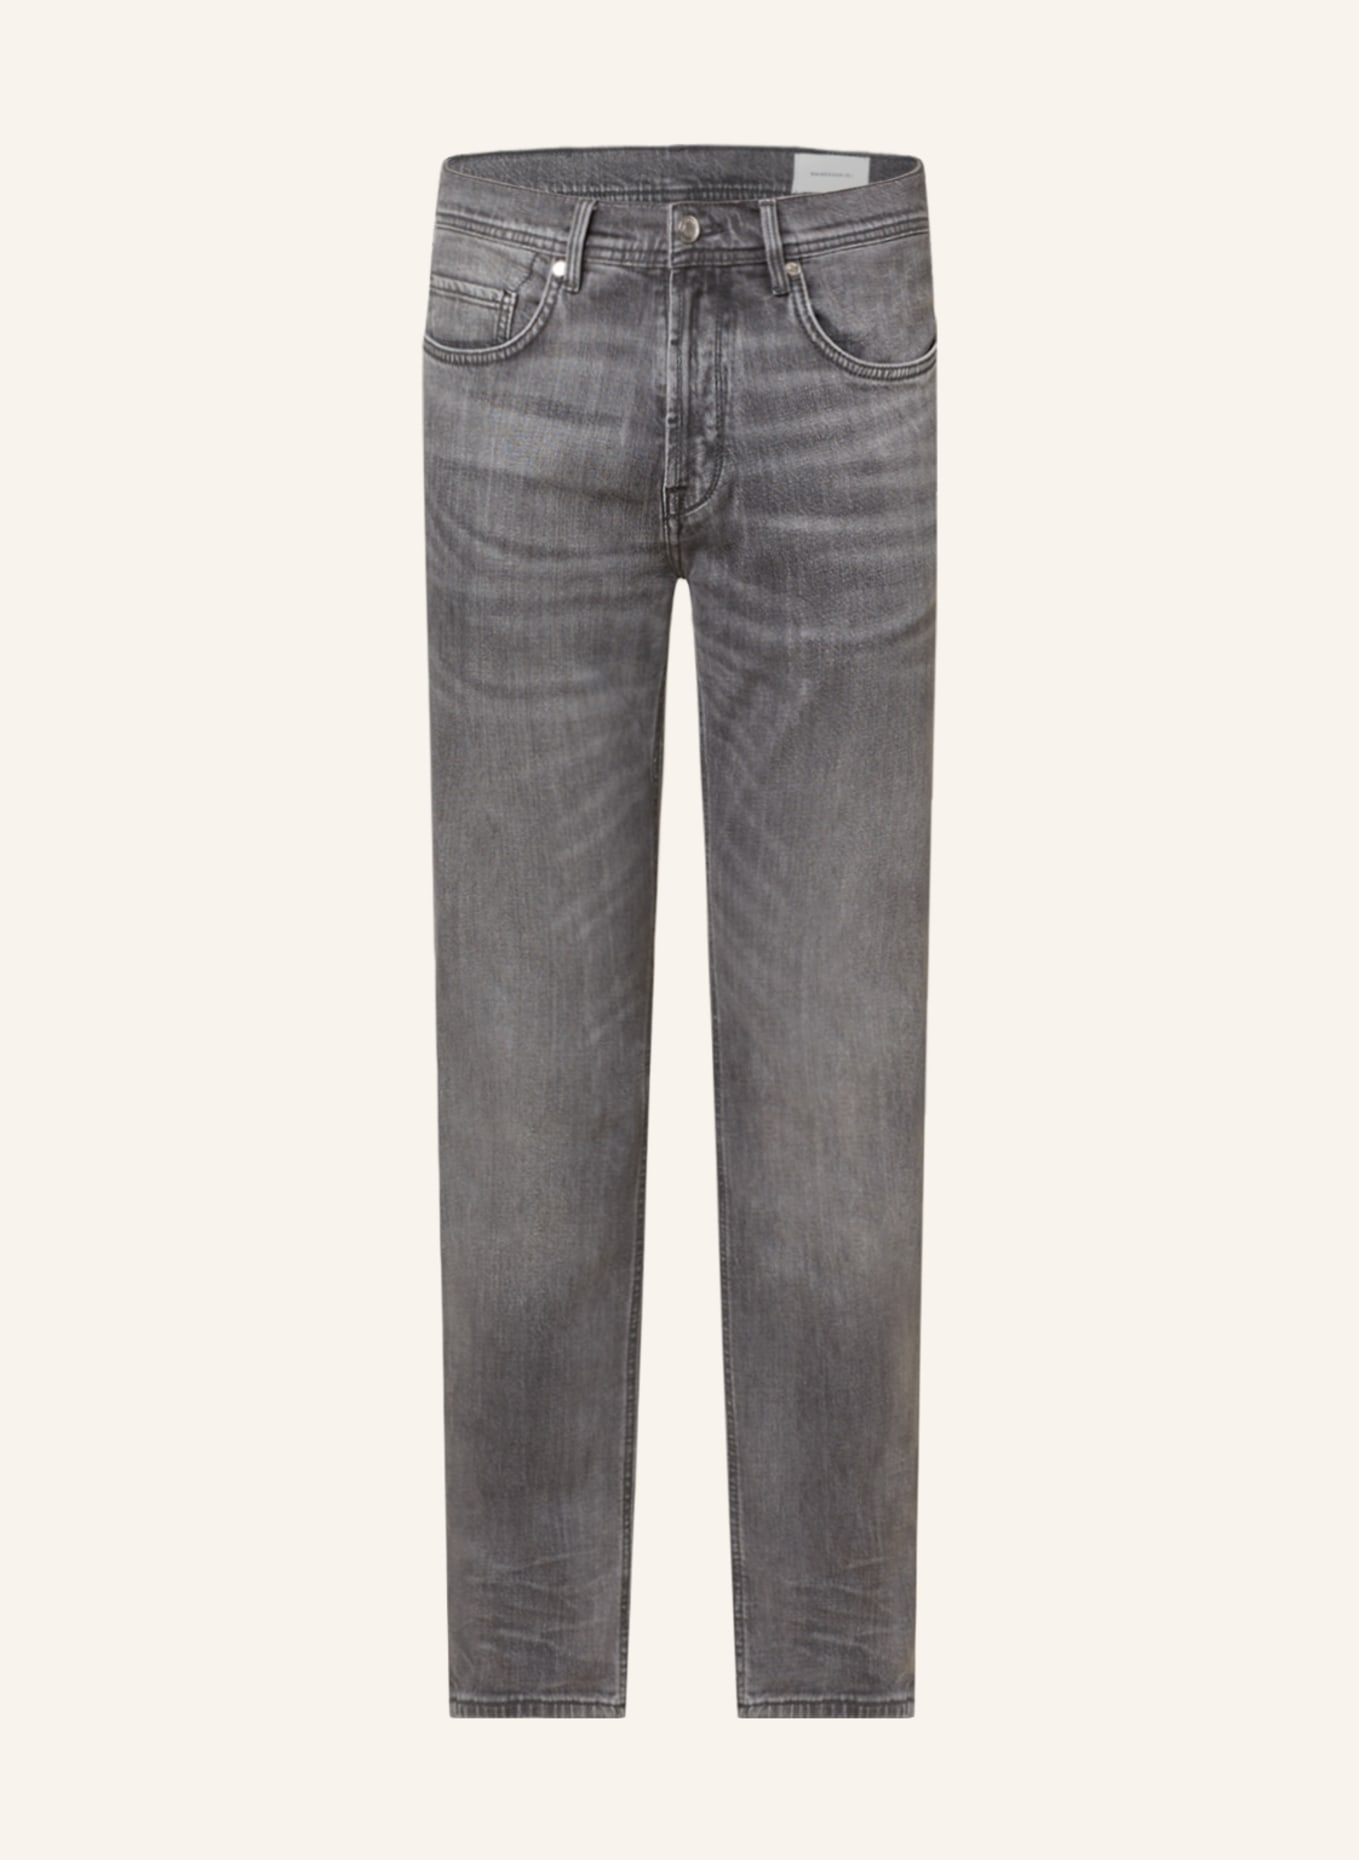 BALDESSARINI Jeans regular fit, Color: 9834 grey used buffies (Image 1)